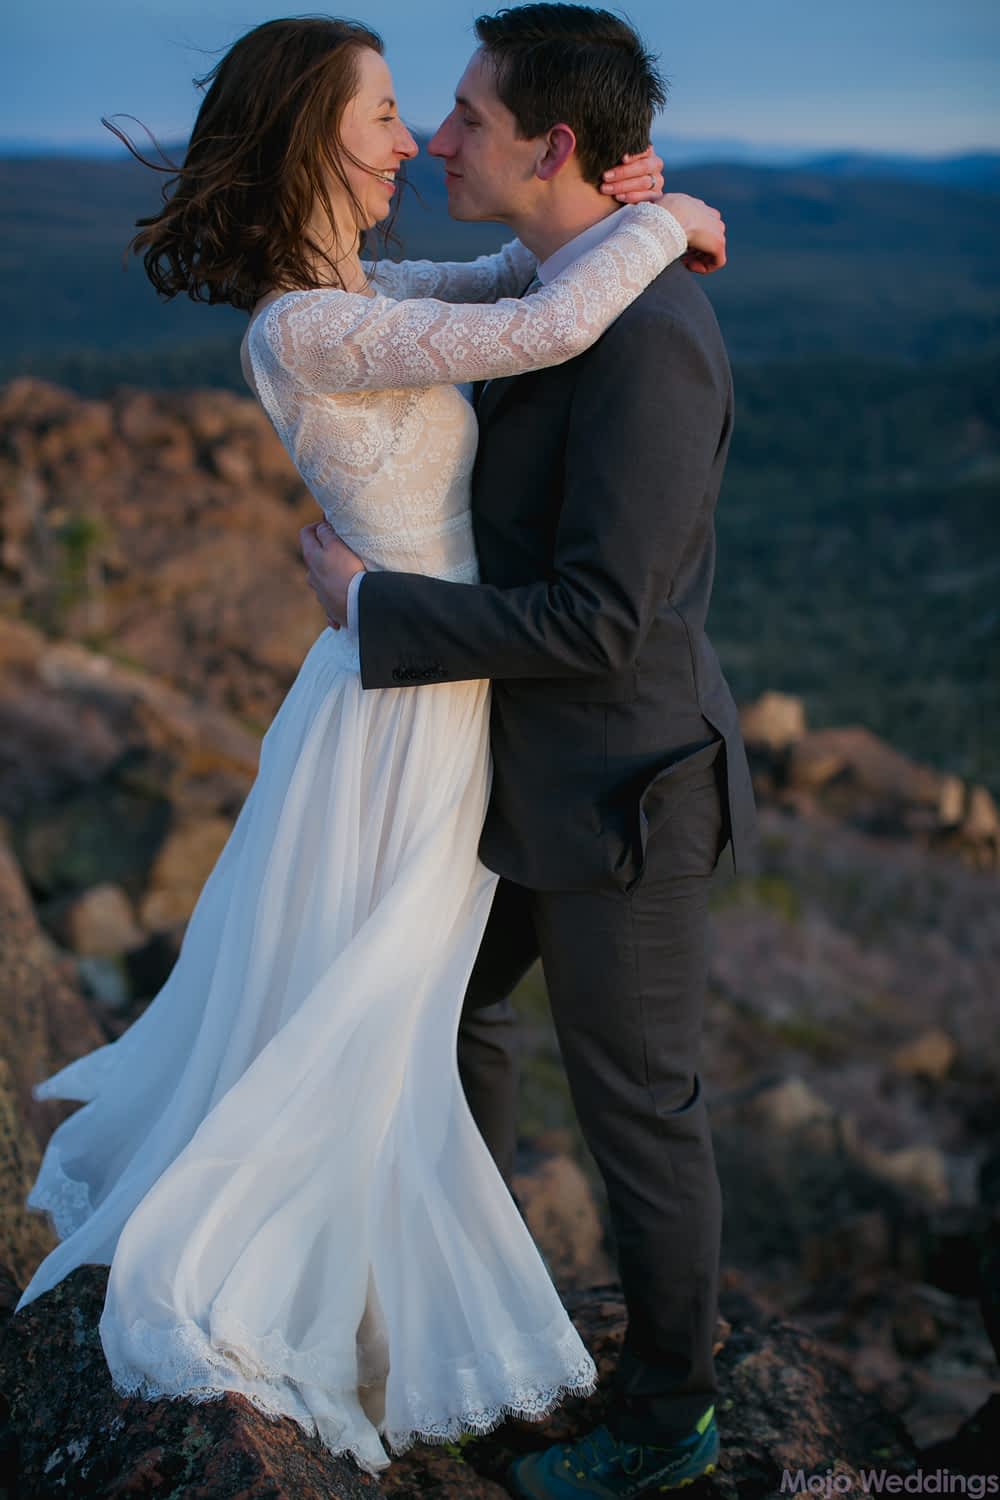 A full length view of the bride and groom holding each other with her dress softly blowing in the wind.